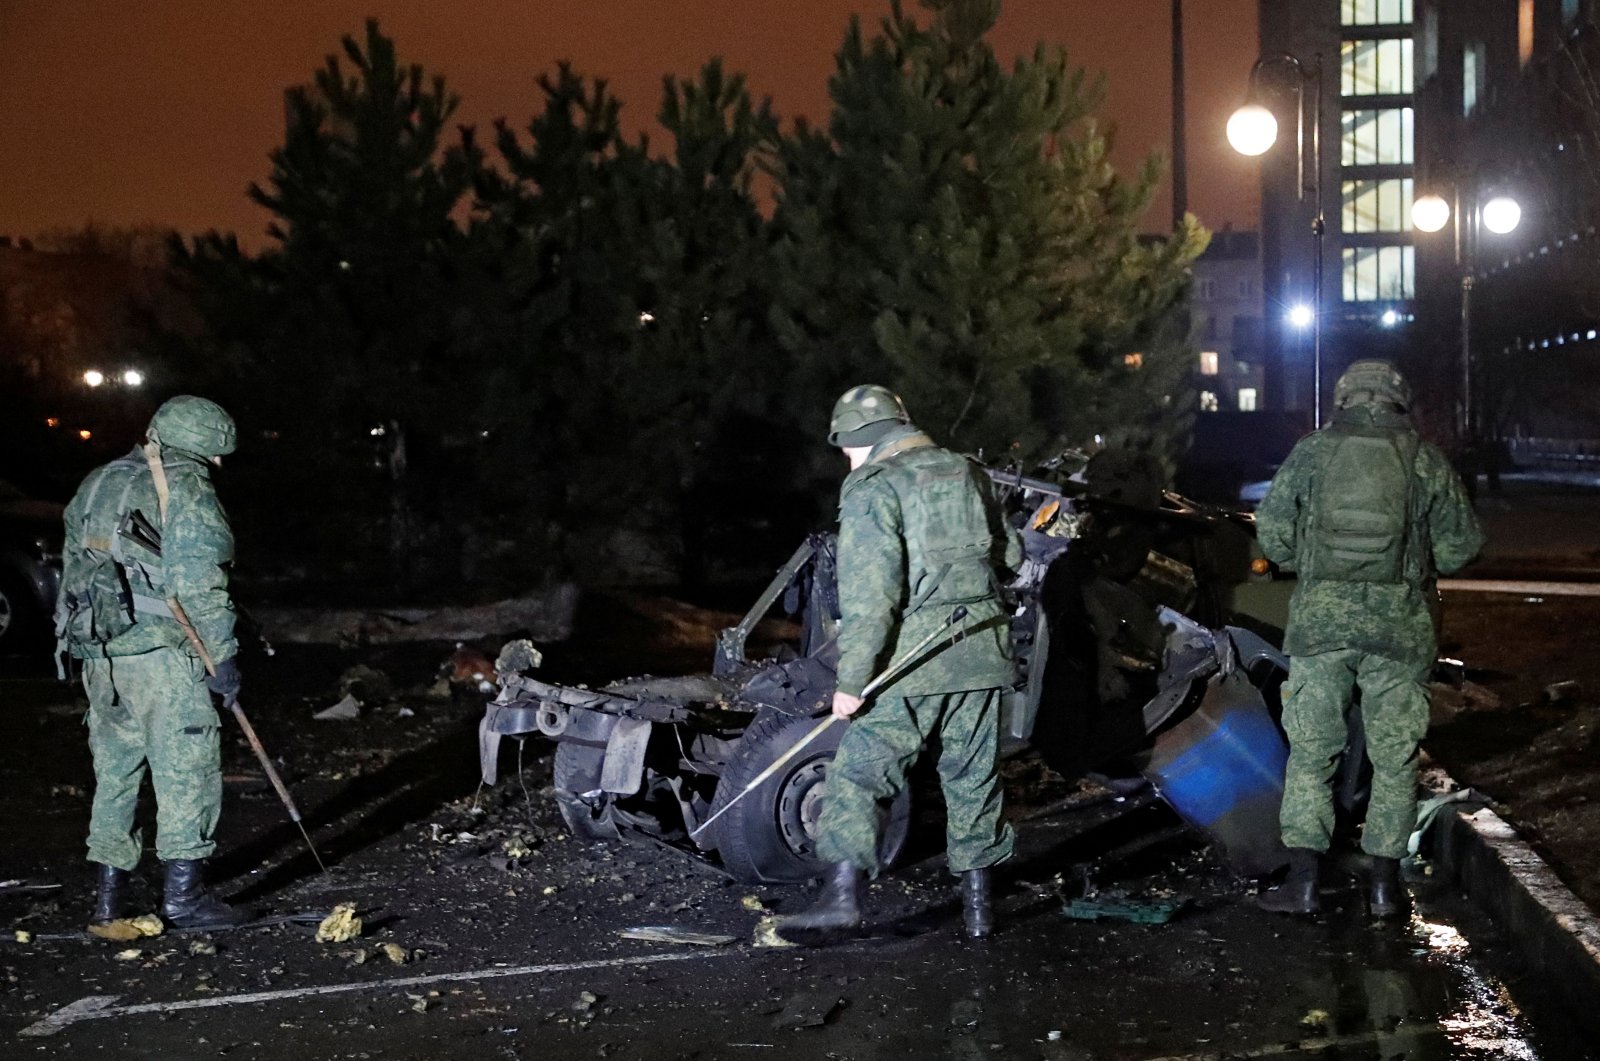 Specialists inspect the wreckage of a car that, according to the local authorities, was blown up near the government building, in the rebel-controlled city of Donetsk, Ukraine, Feb. 18, 2022. (Reuters Photo)